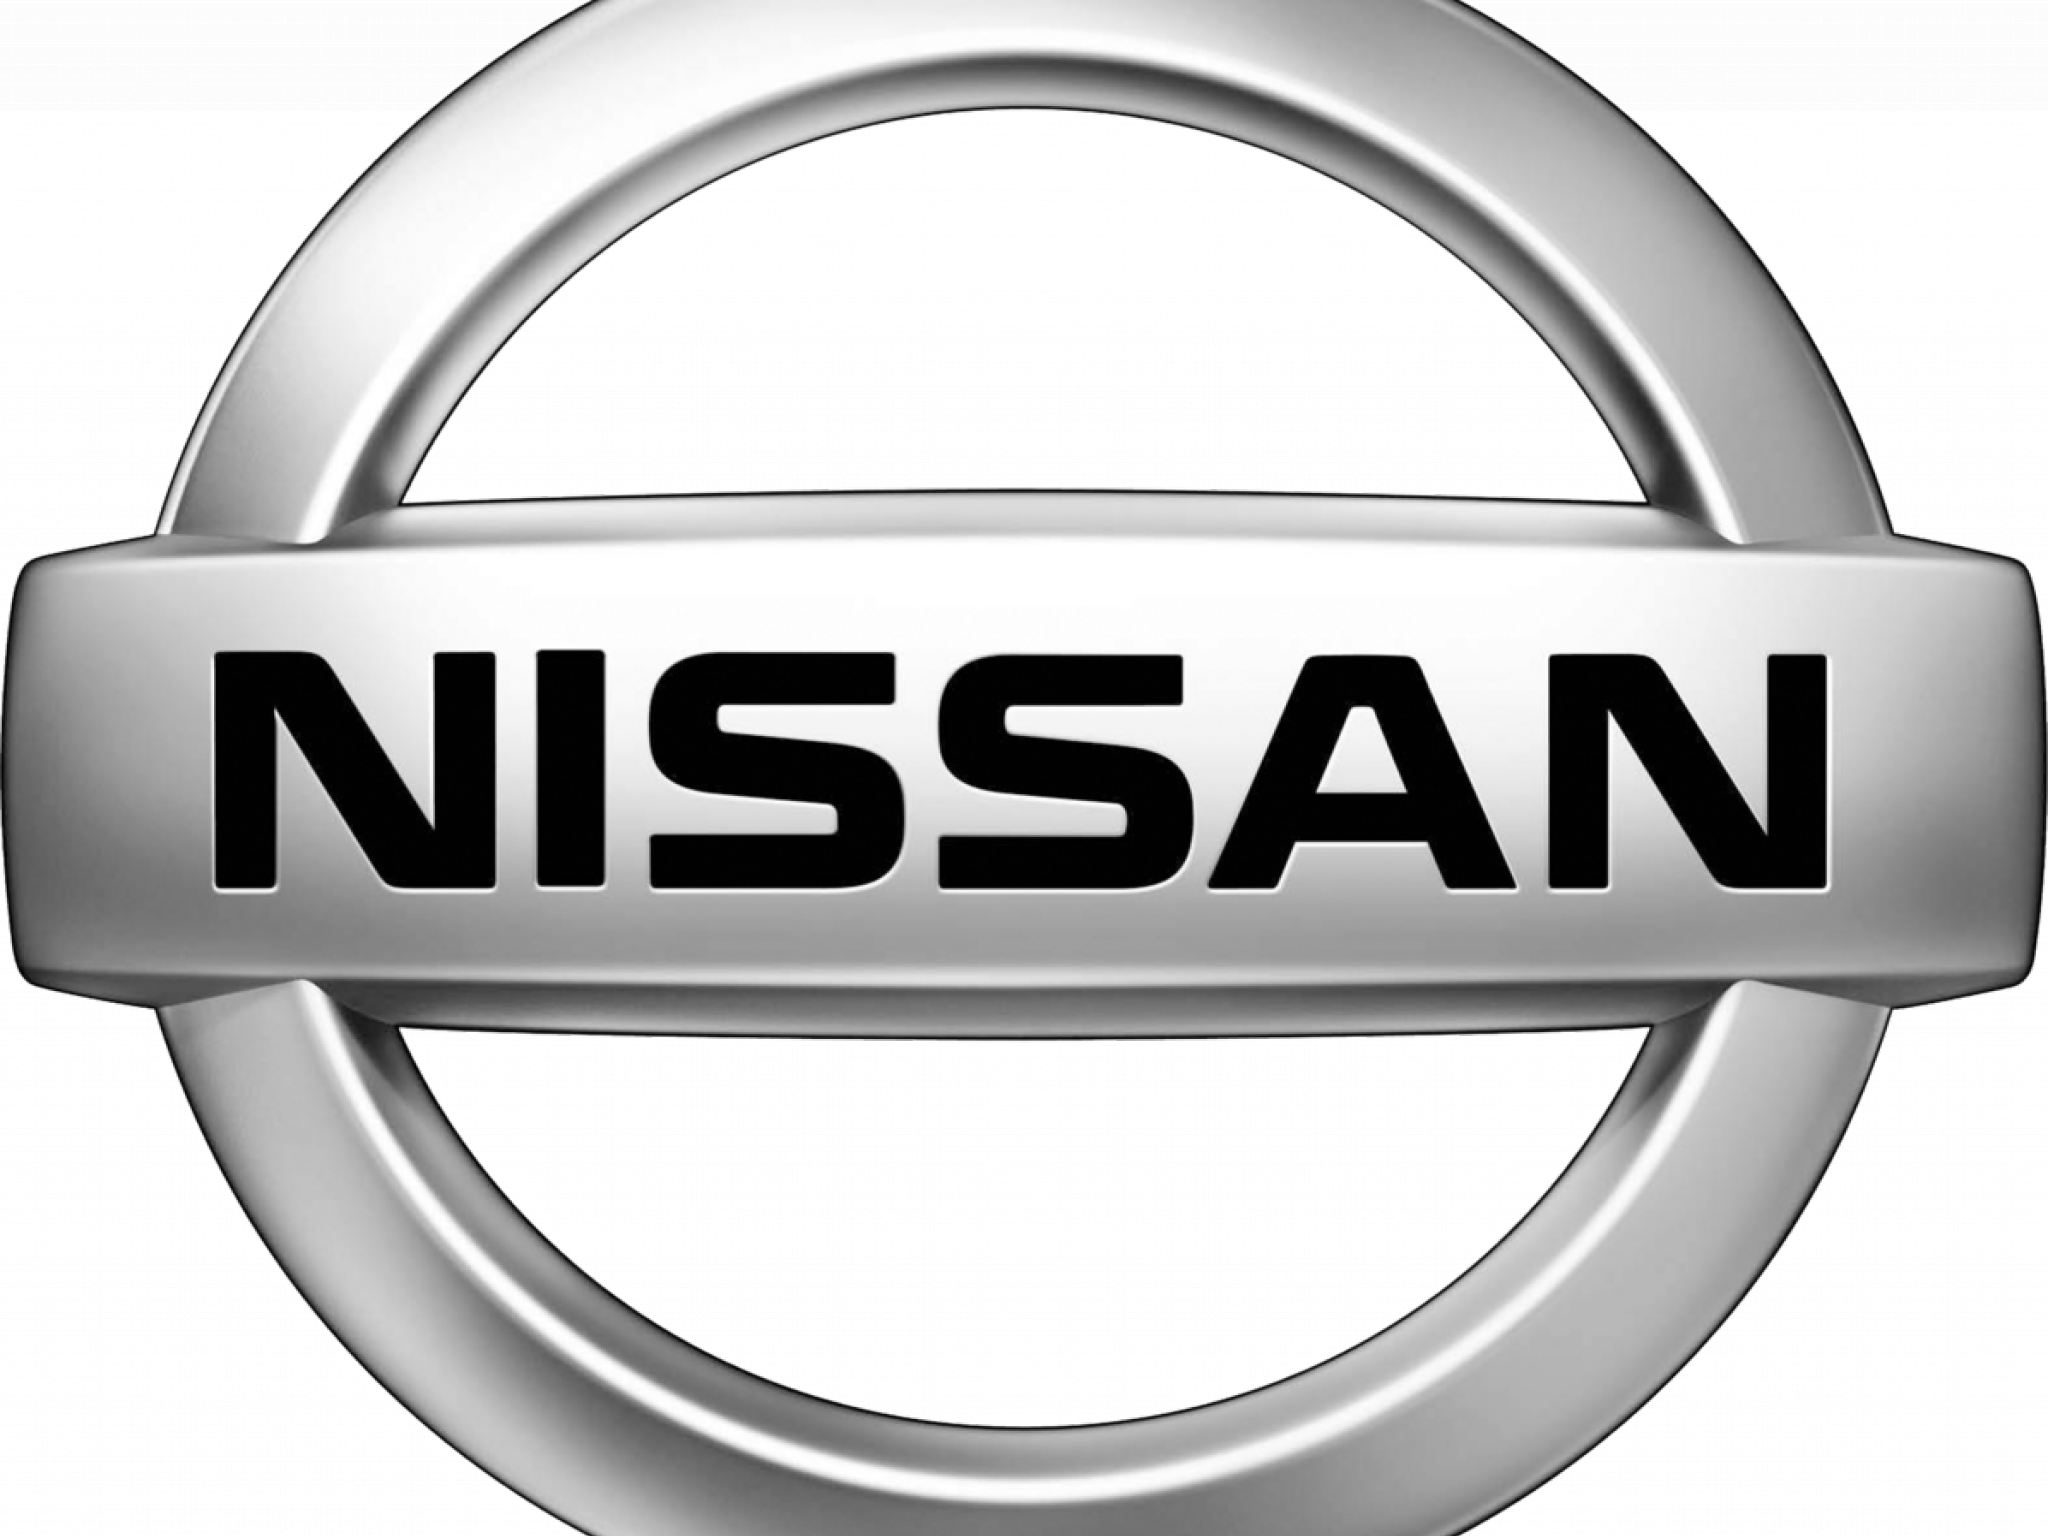  renault-and-nissan-reach-equal-cross-shareholding-under-new-deal-nissan-to-become-strategic-holder-in-renaults-ampere 